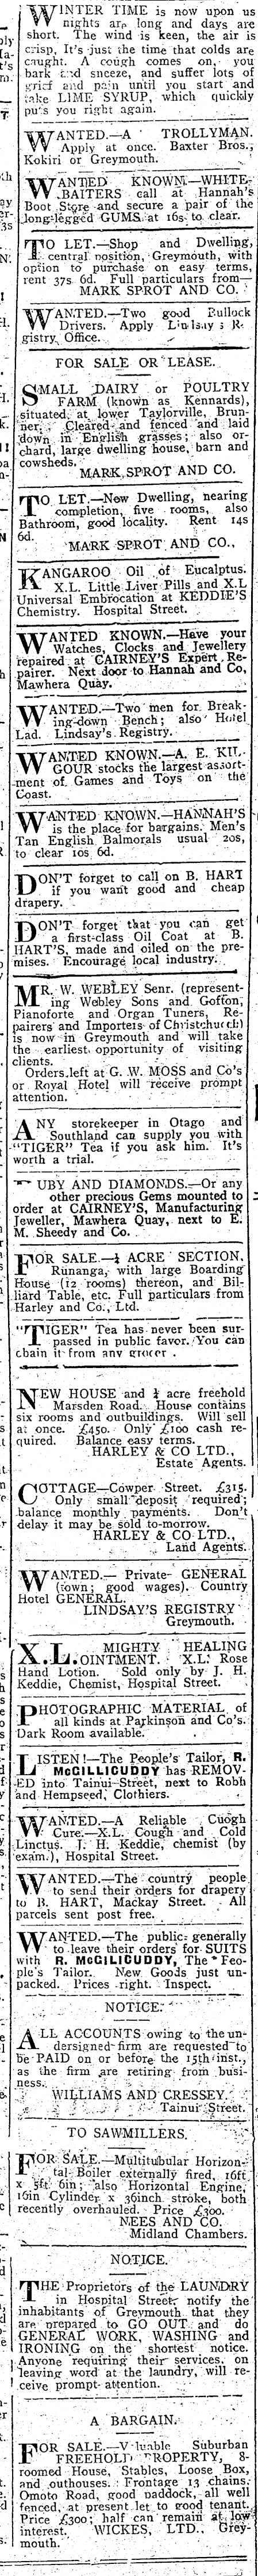 Papers Past Newspapers Grey River Argus 6 August 1907 Page 3 Advertisements Column 3